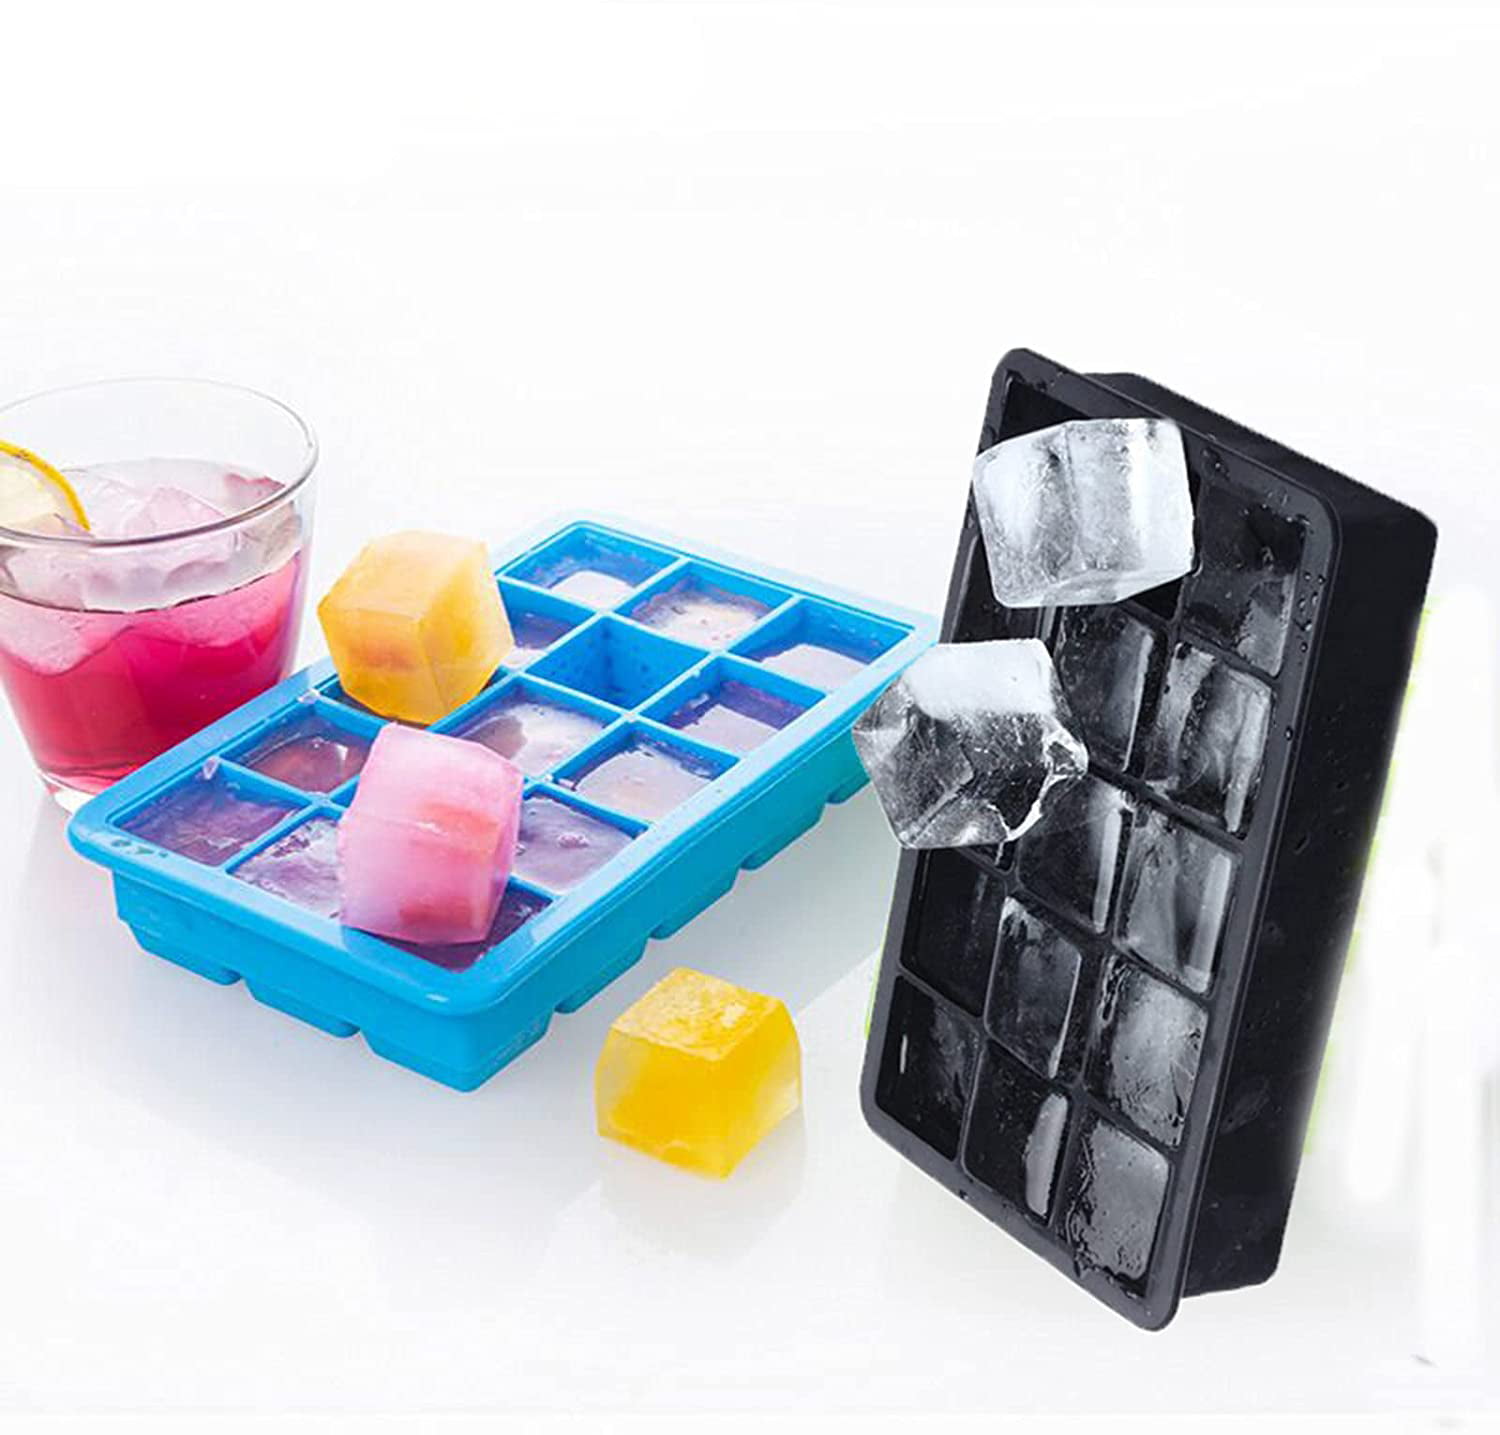 15 Grids Ice Cube Tray Round Diamond Ball Ice Mold Maker Bar Whiskey Cocktails 